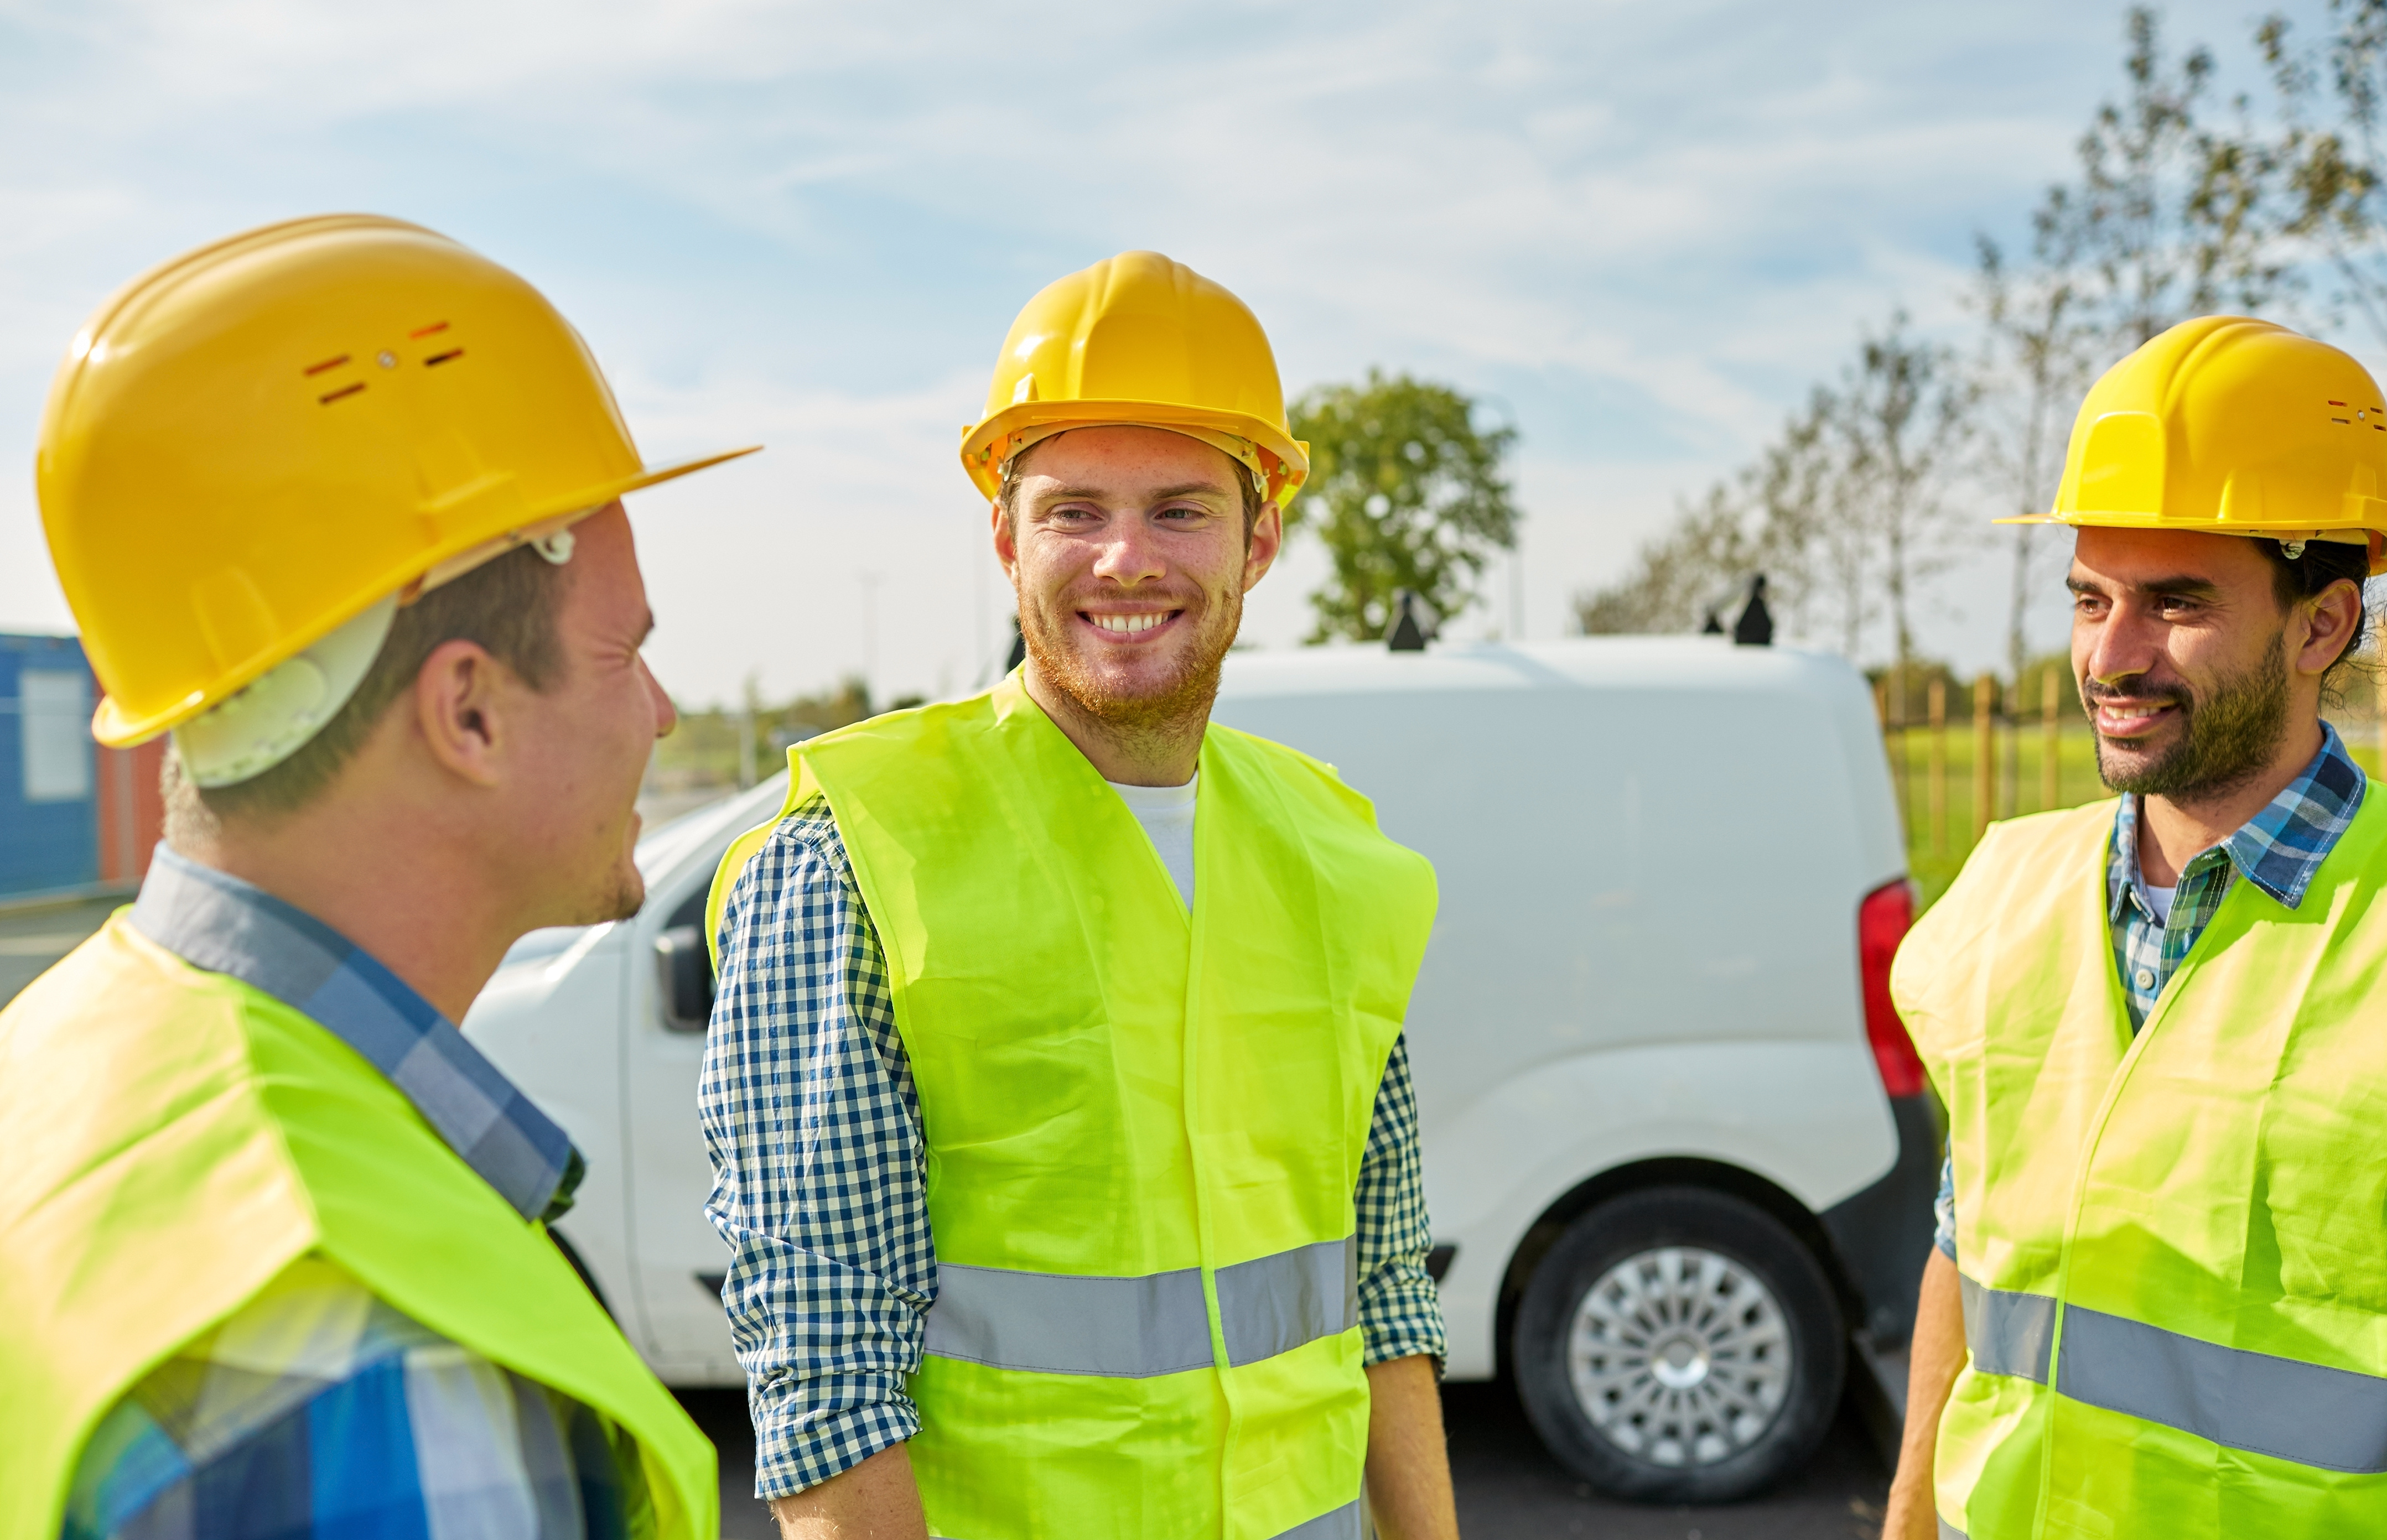 group of three contractors standing in front of vehicle